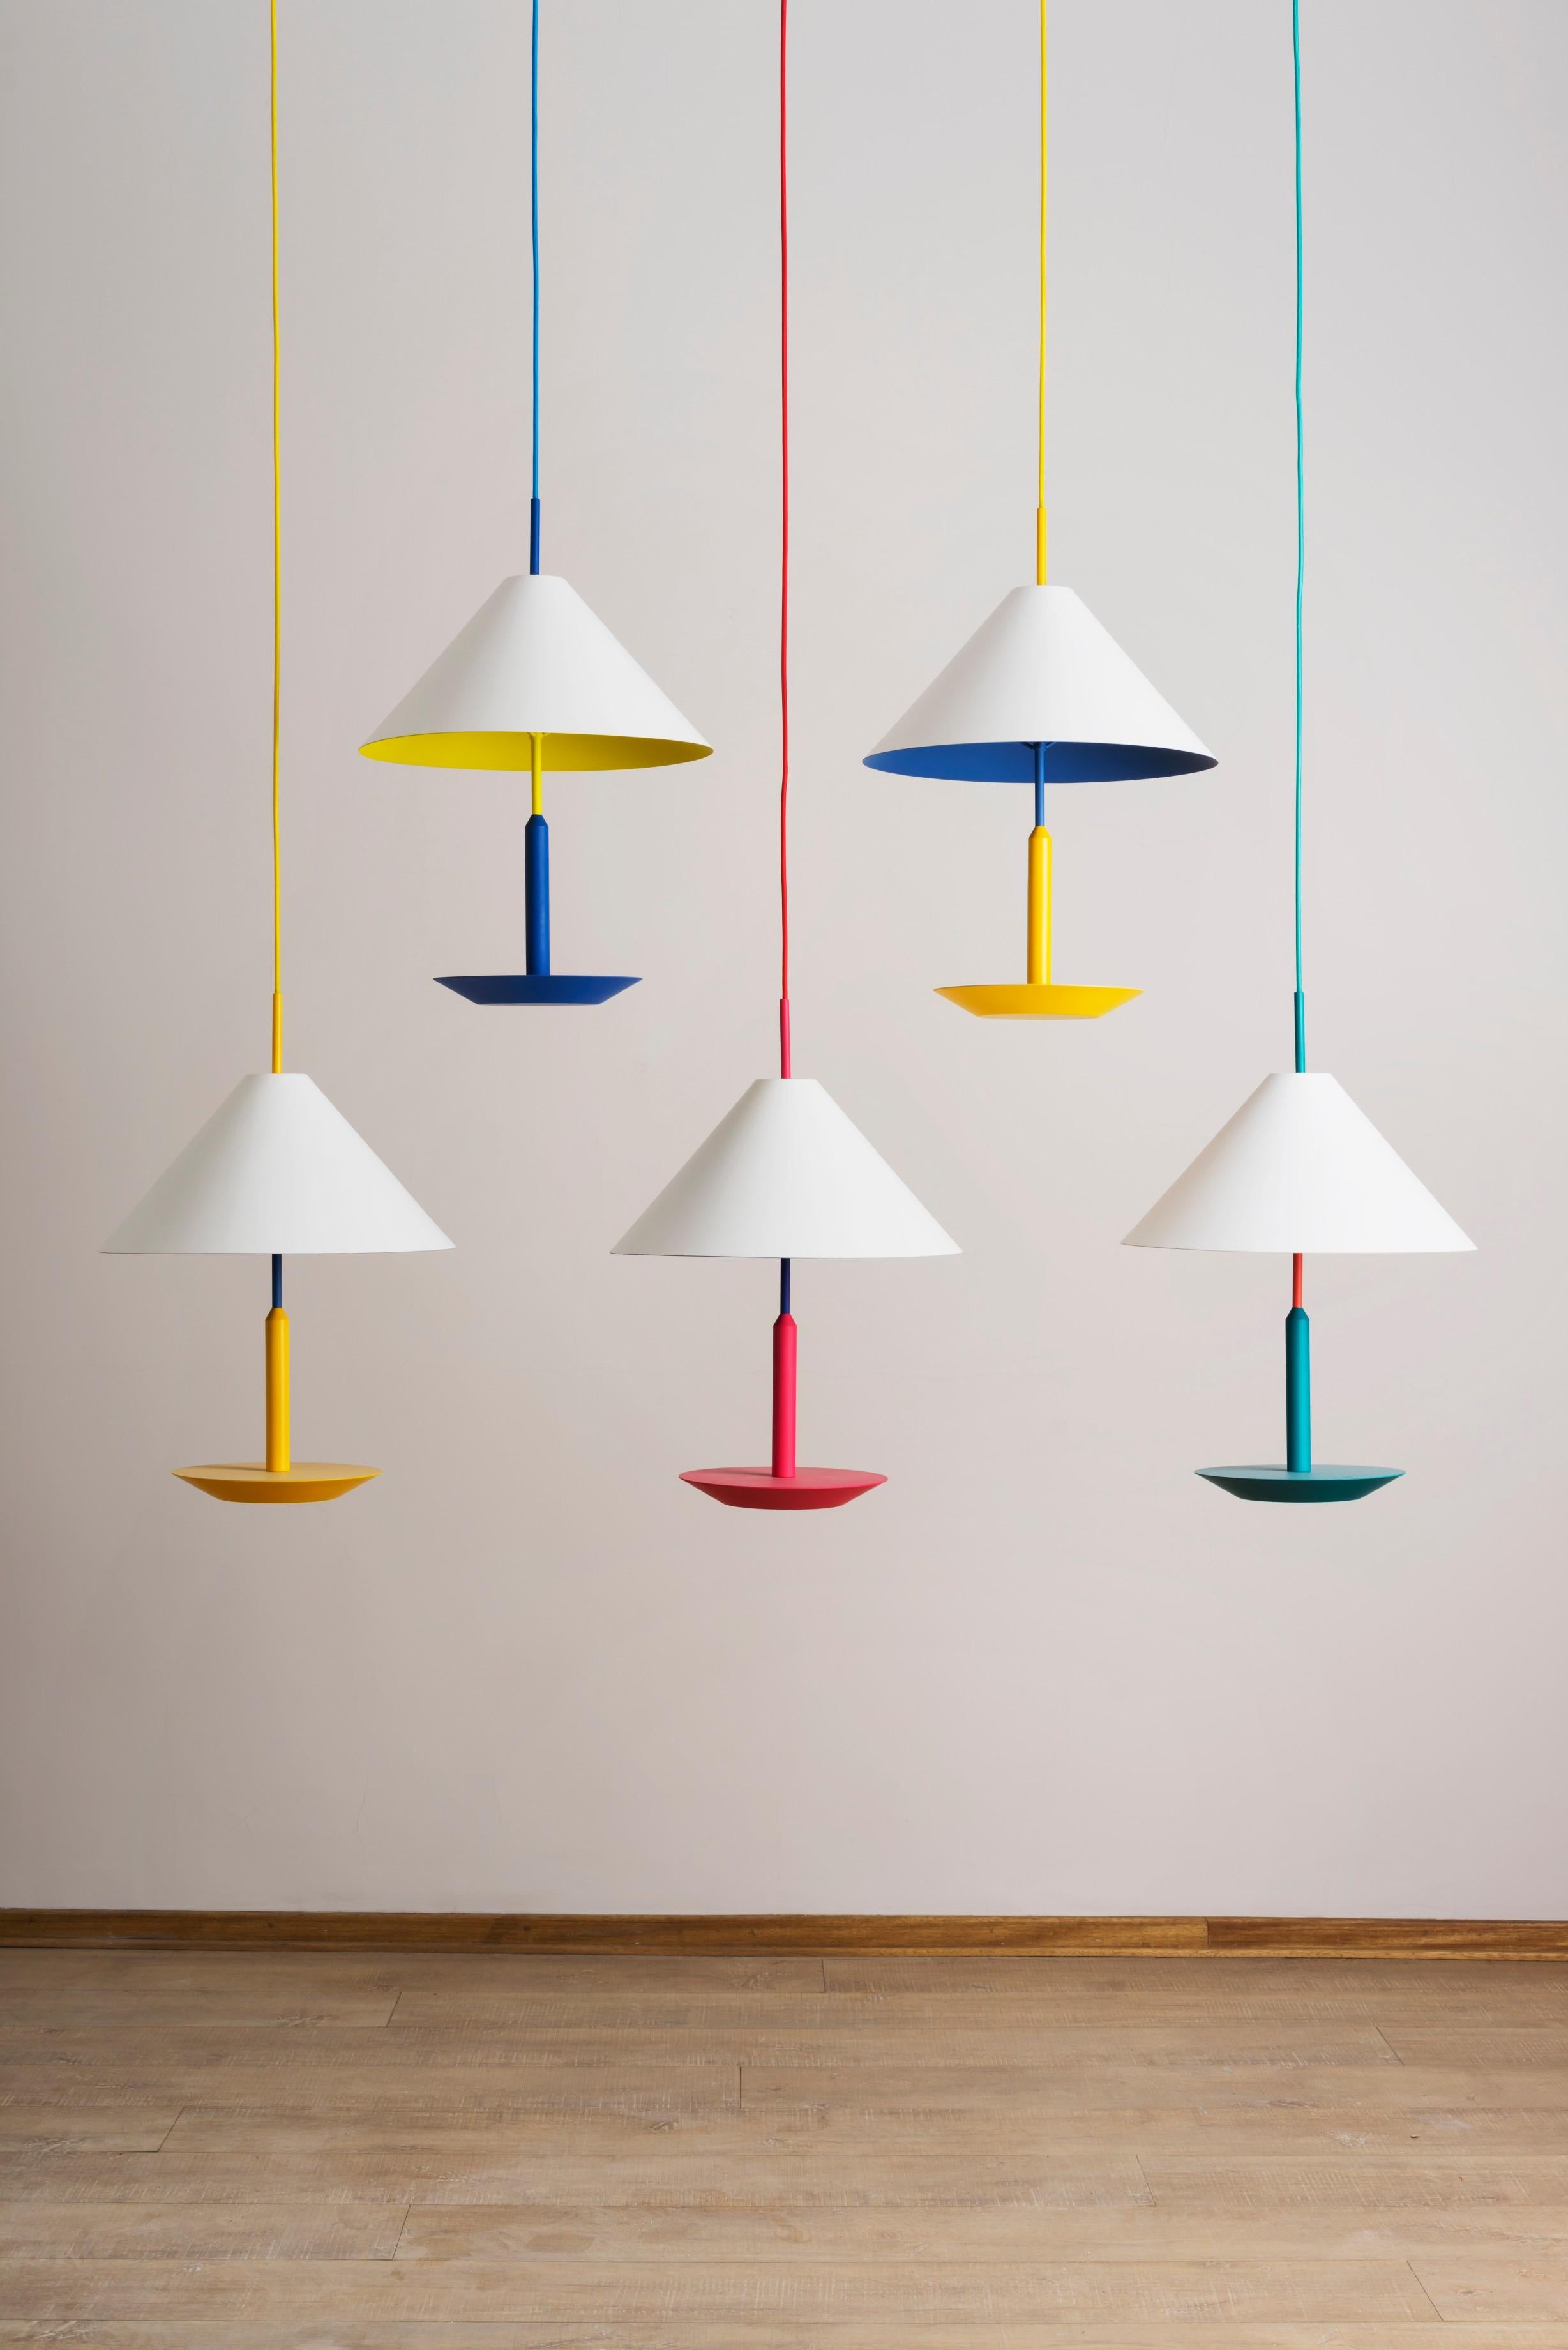 Colorful pendant lamp by Thomas Dariel, Maison Dada
Measures: Diameter 45 x height 65 cm
Tricolored
Powder coated metal shade in matte white
Vibrant complementary tones on lampshade’s interior and base
Color cable, adjustable cable height (max